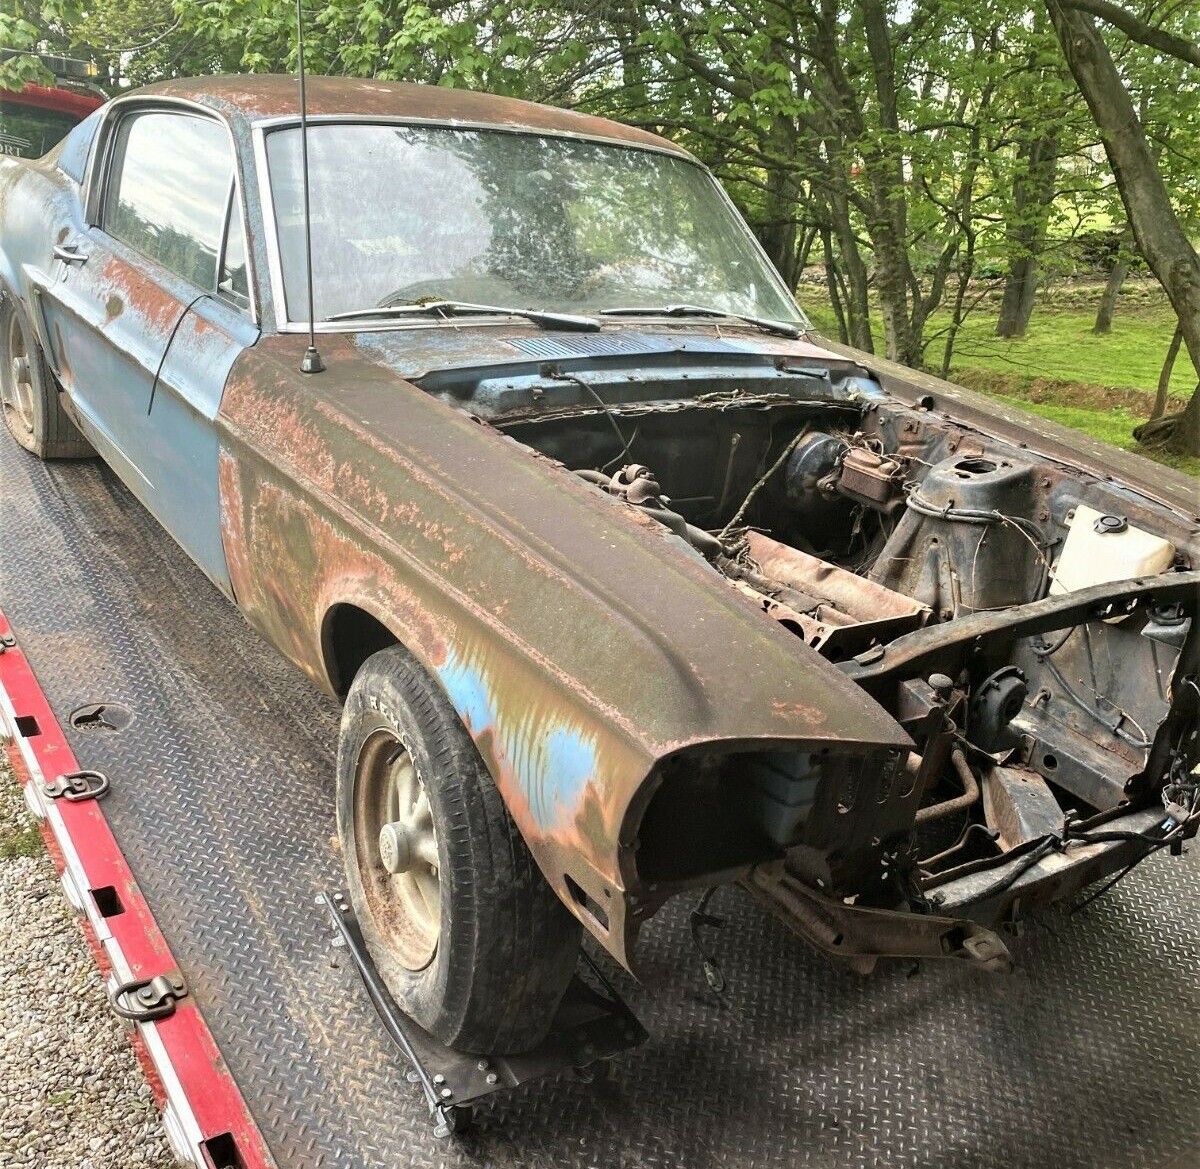 Rare 1968 Ford Mustang Cobra Jet Was Abandoned in the Forest, You Can ...